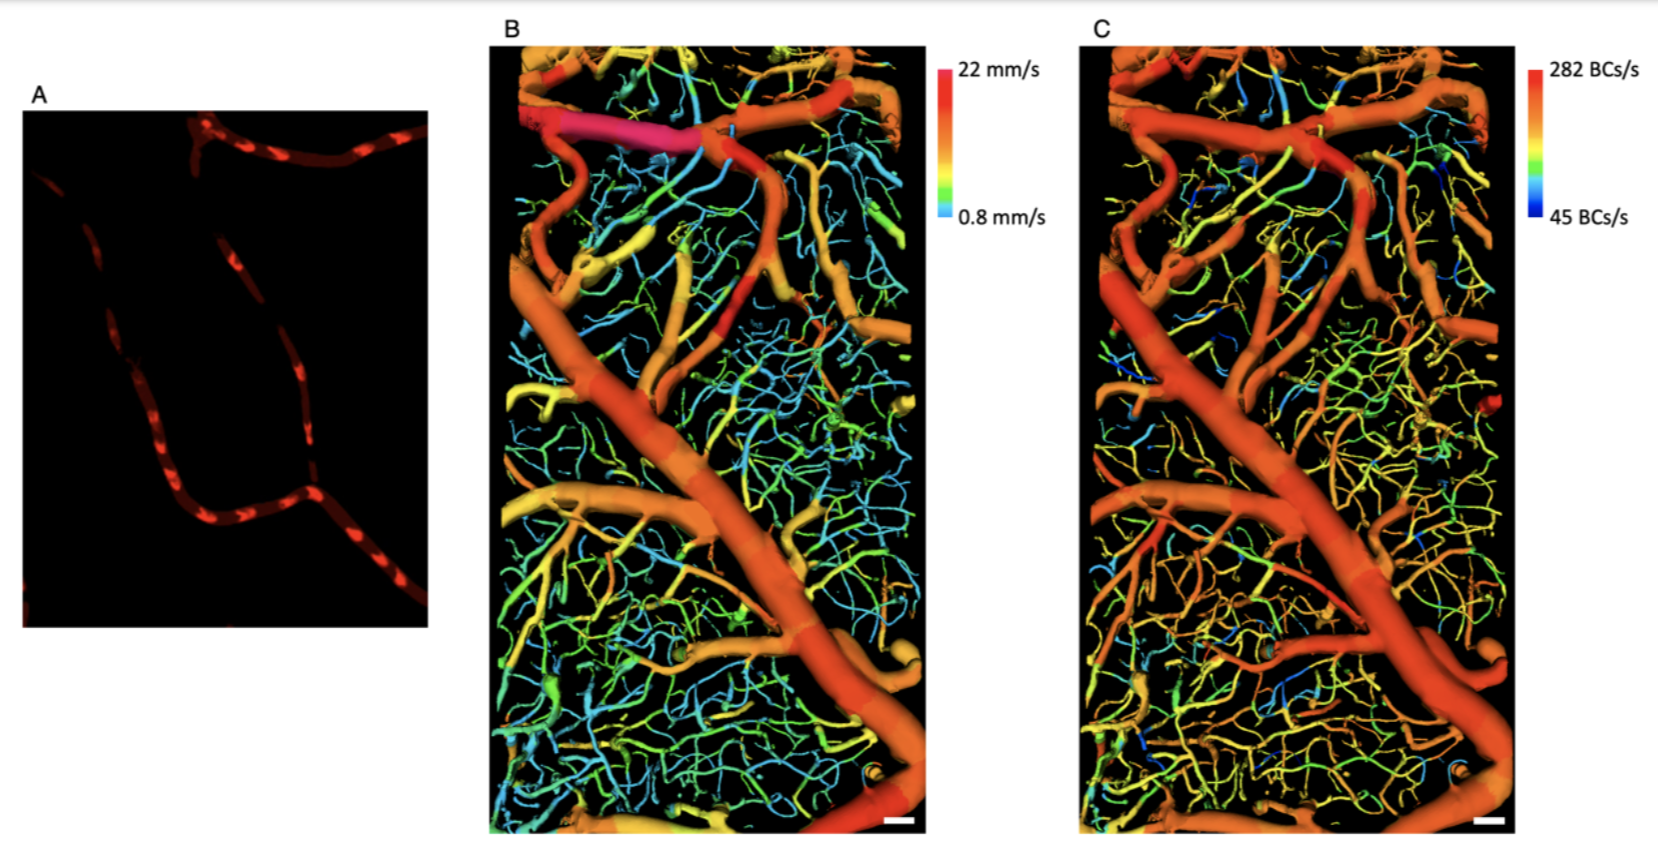 Figure 1. (A) Red blood cells (RBCs) flowing within blood vessels imaged using the developed technology. (B) RBC velocity. (C) RBC flux.  